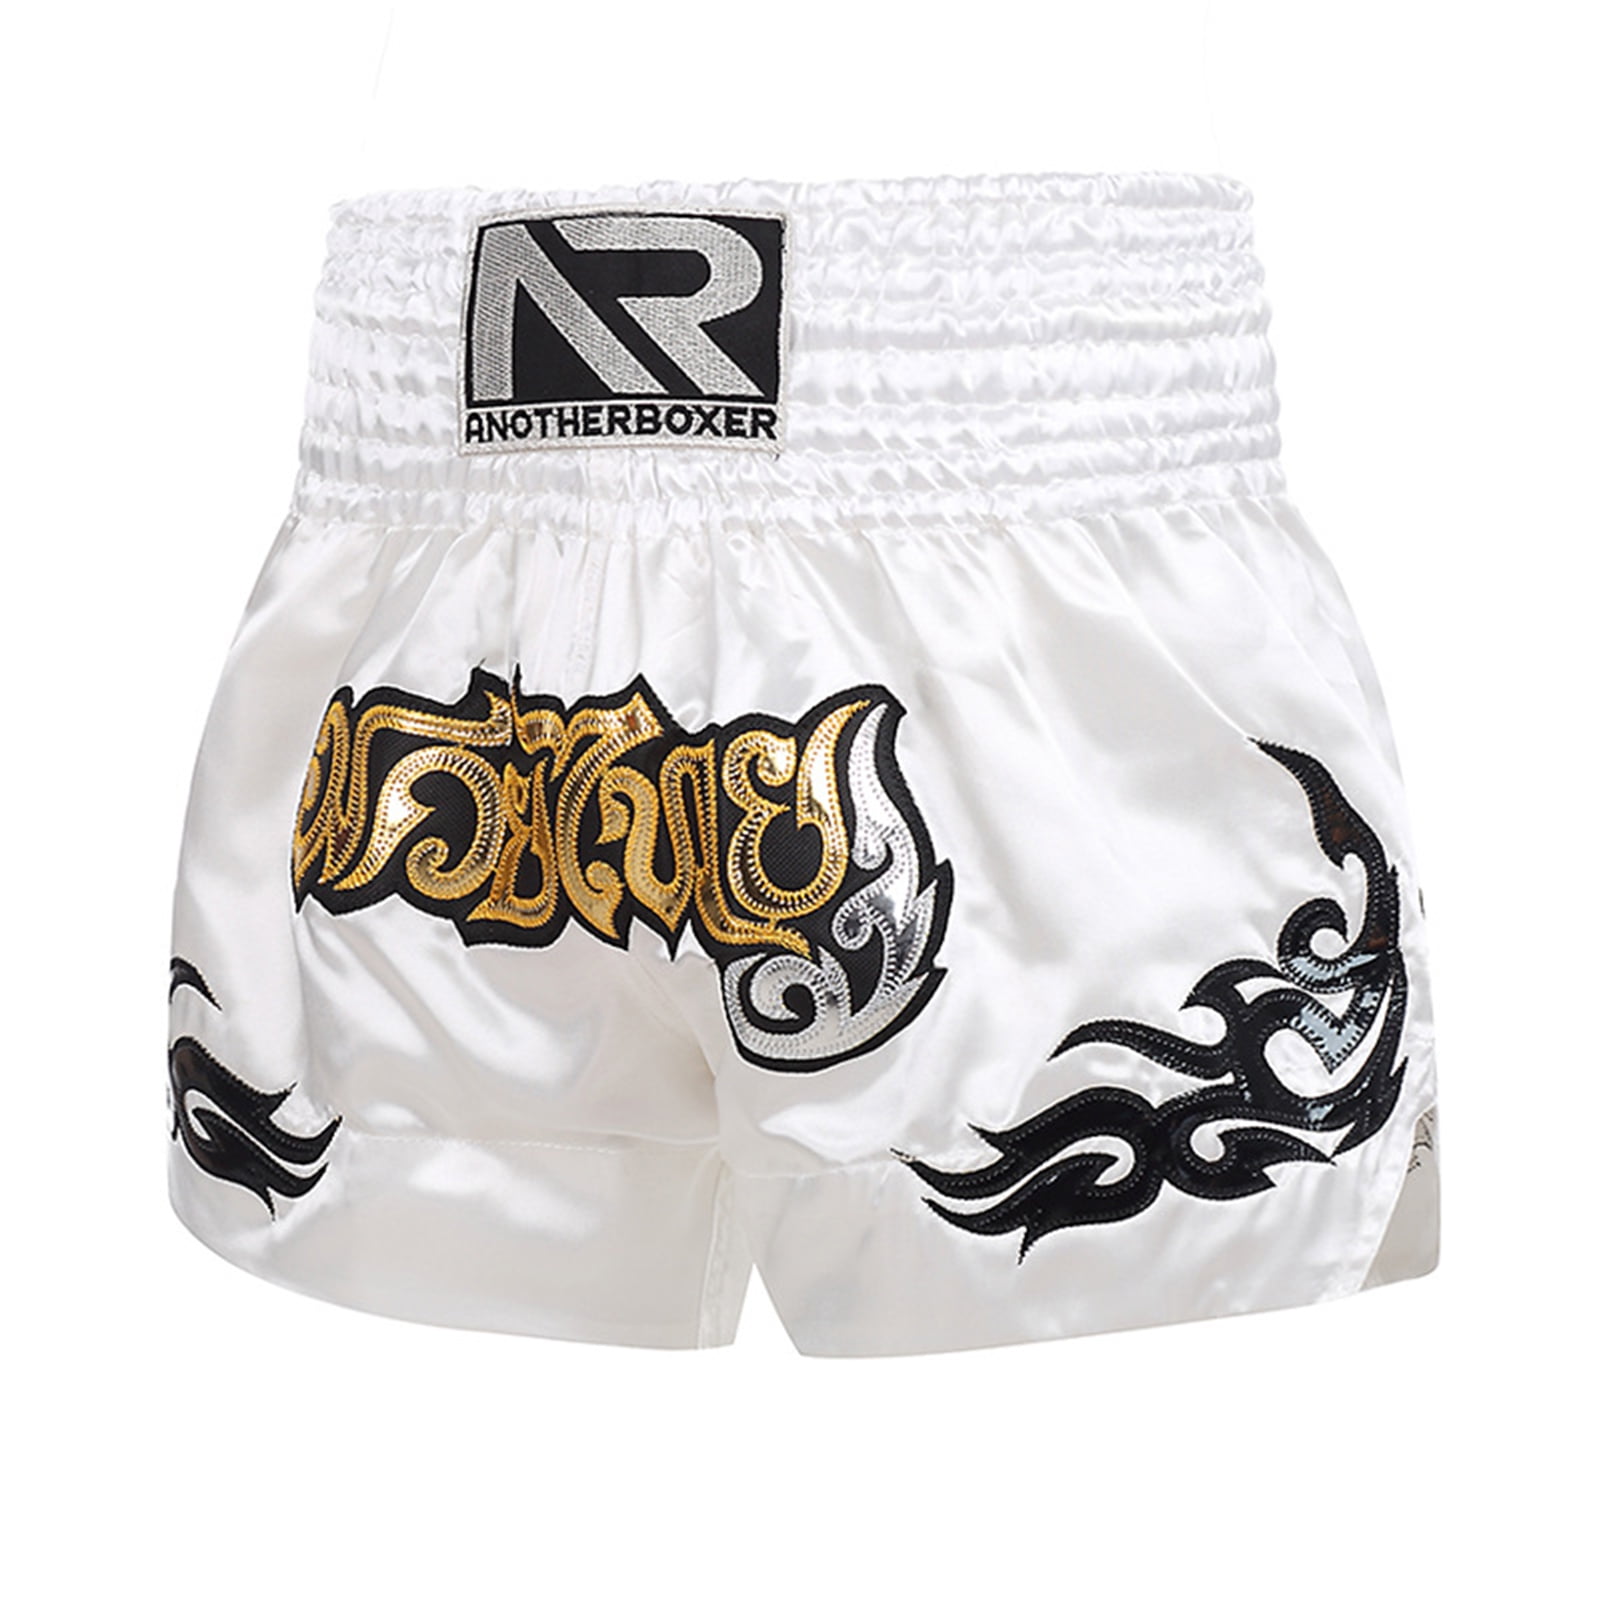 Anotherboxer Muay Thai Fight Shorts MMA Kick Boxing Grappling Unisex Pants 